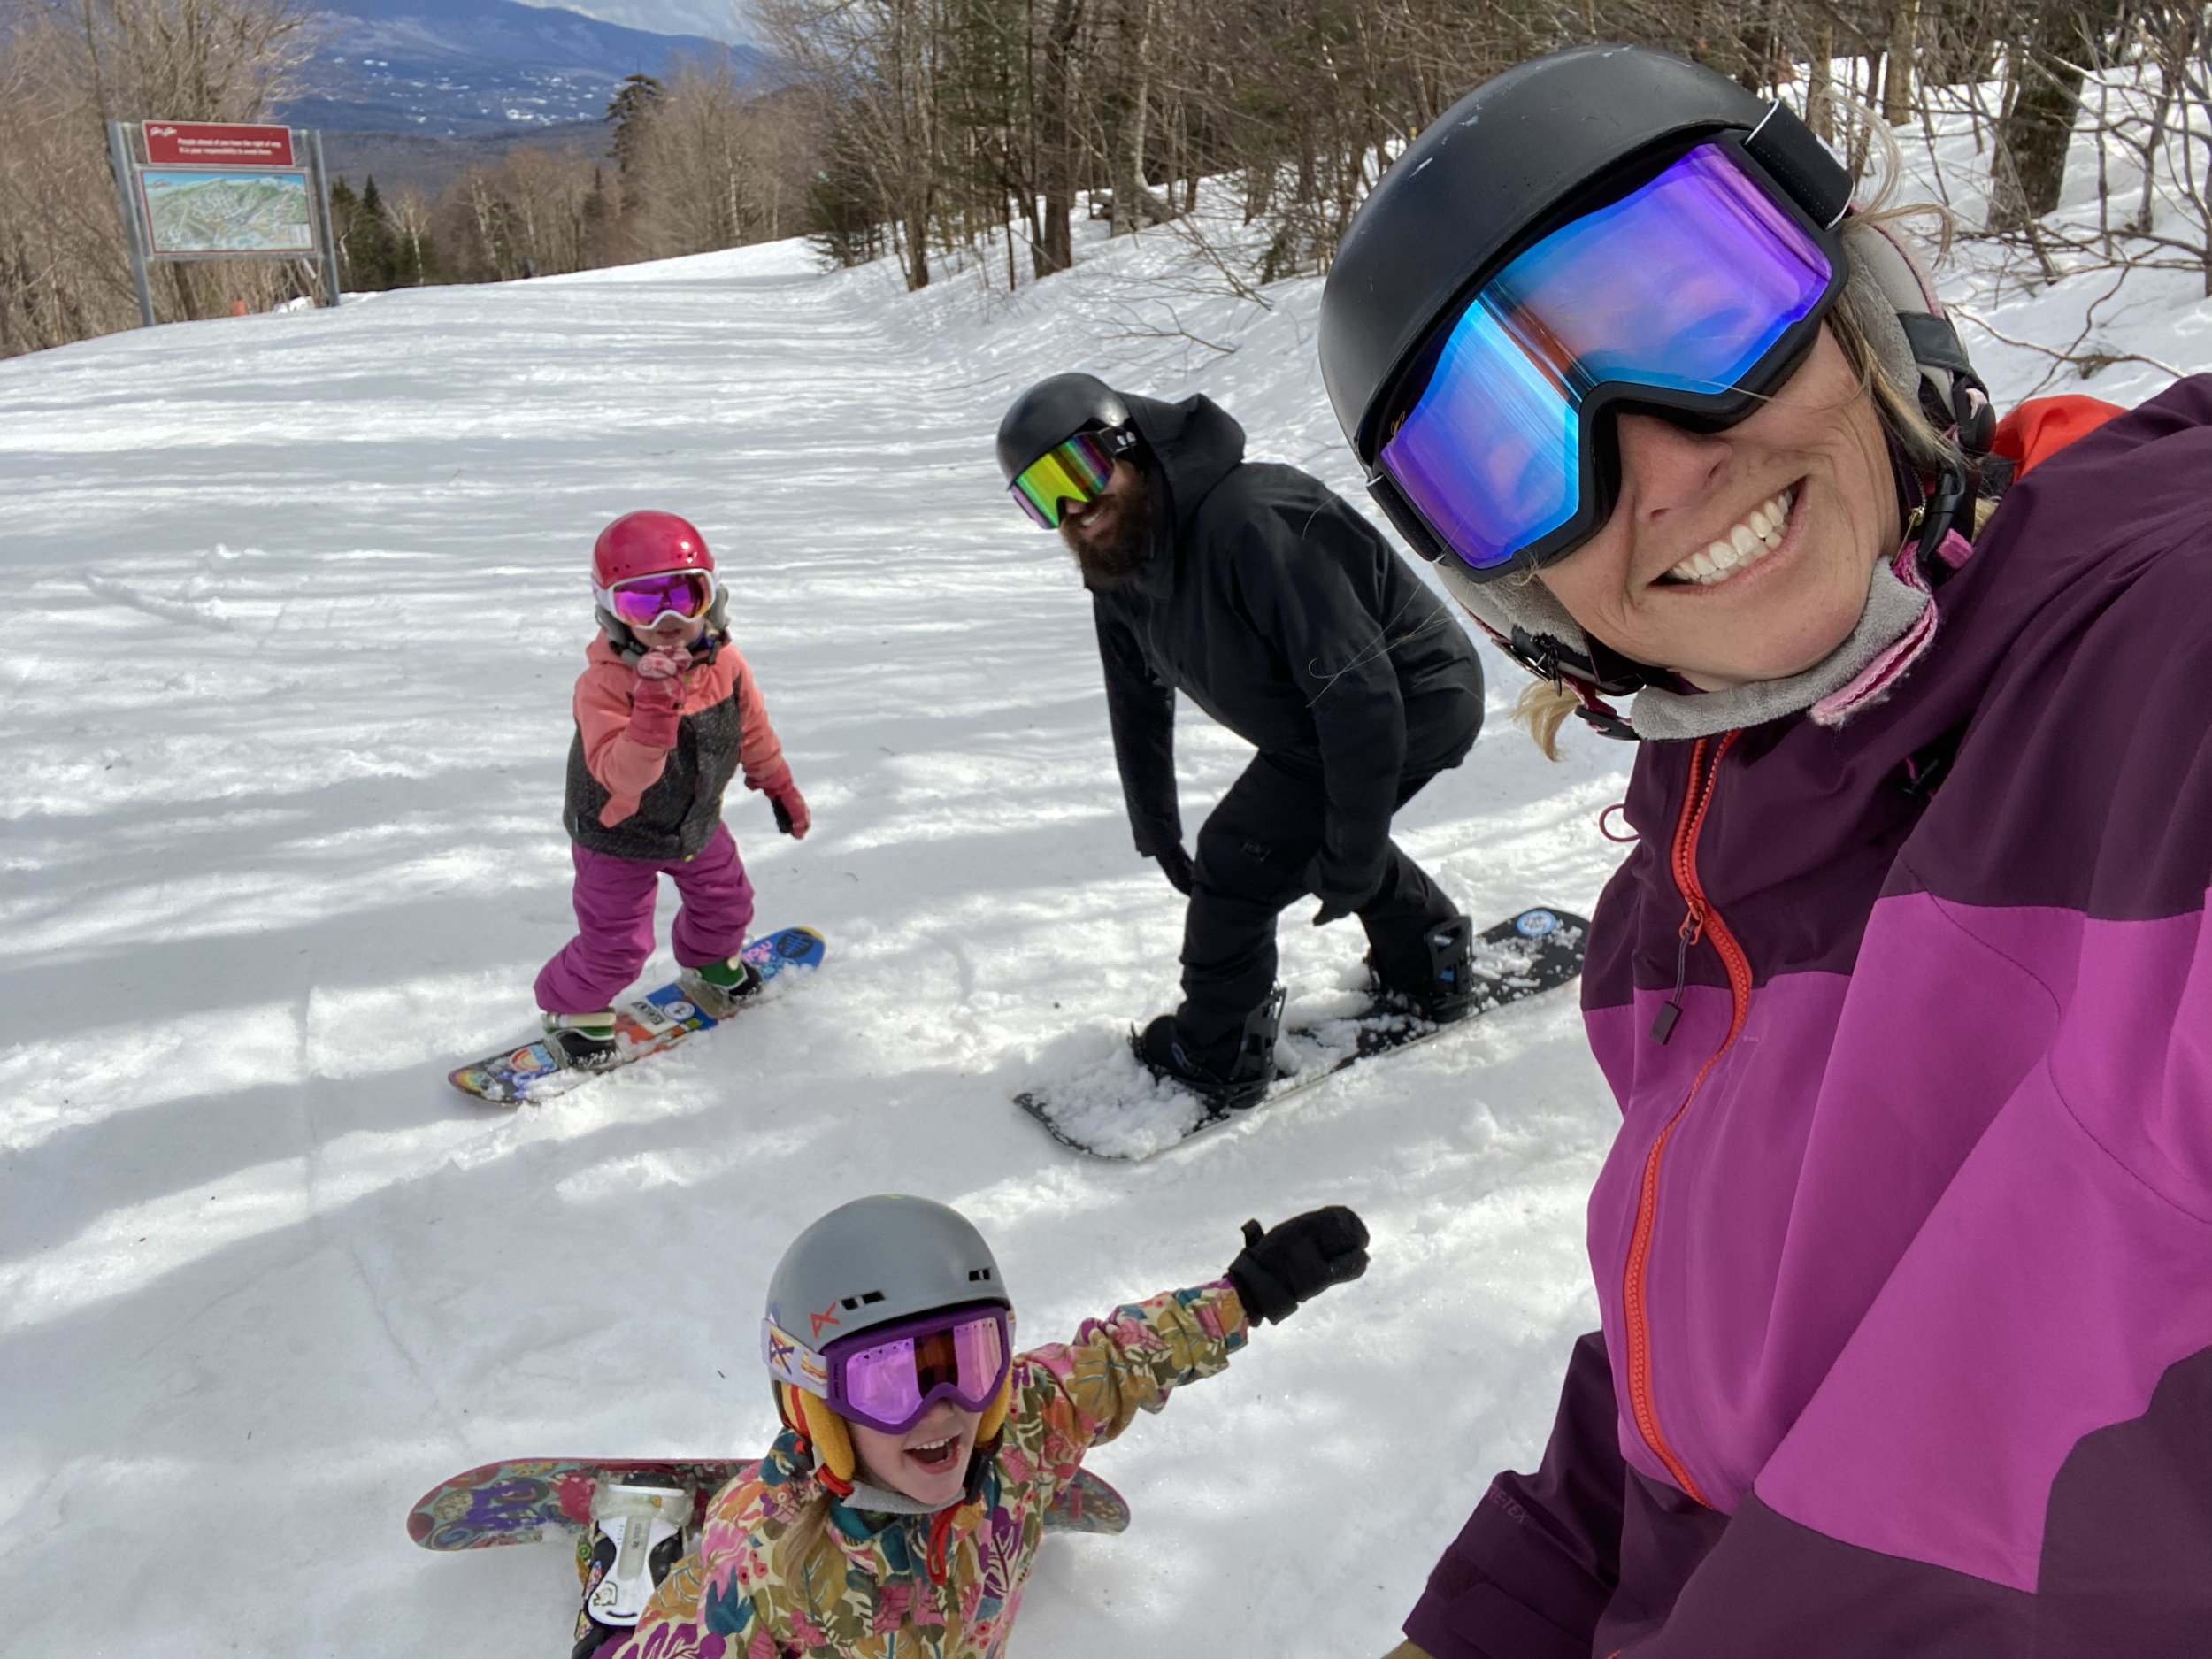 Family Snowboard Day